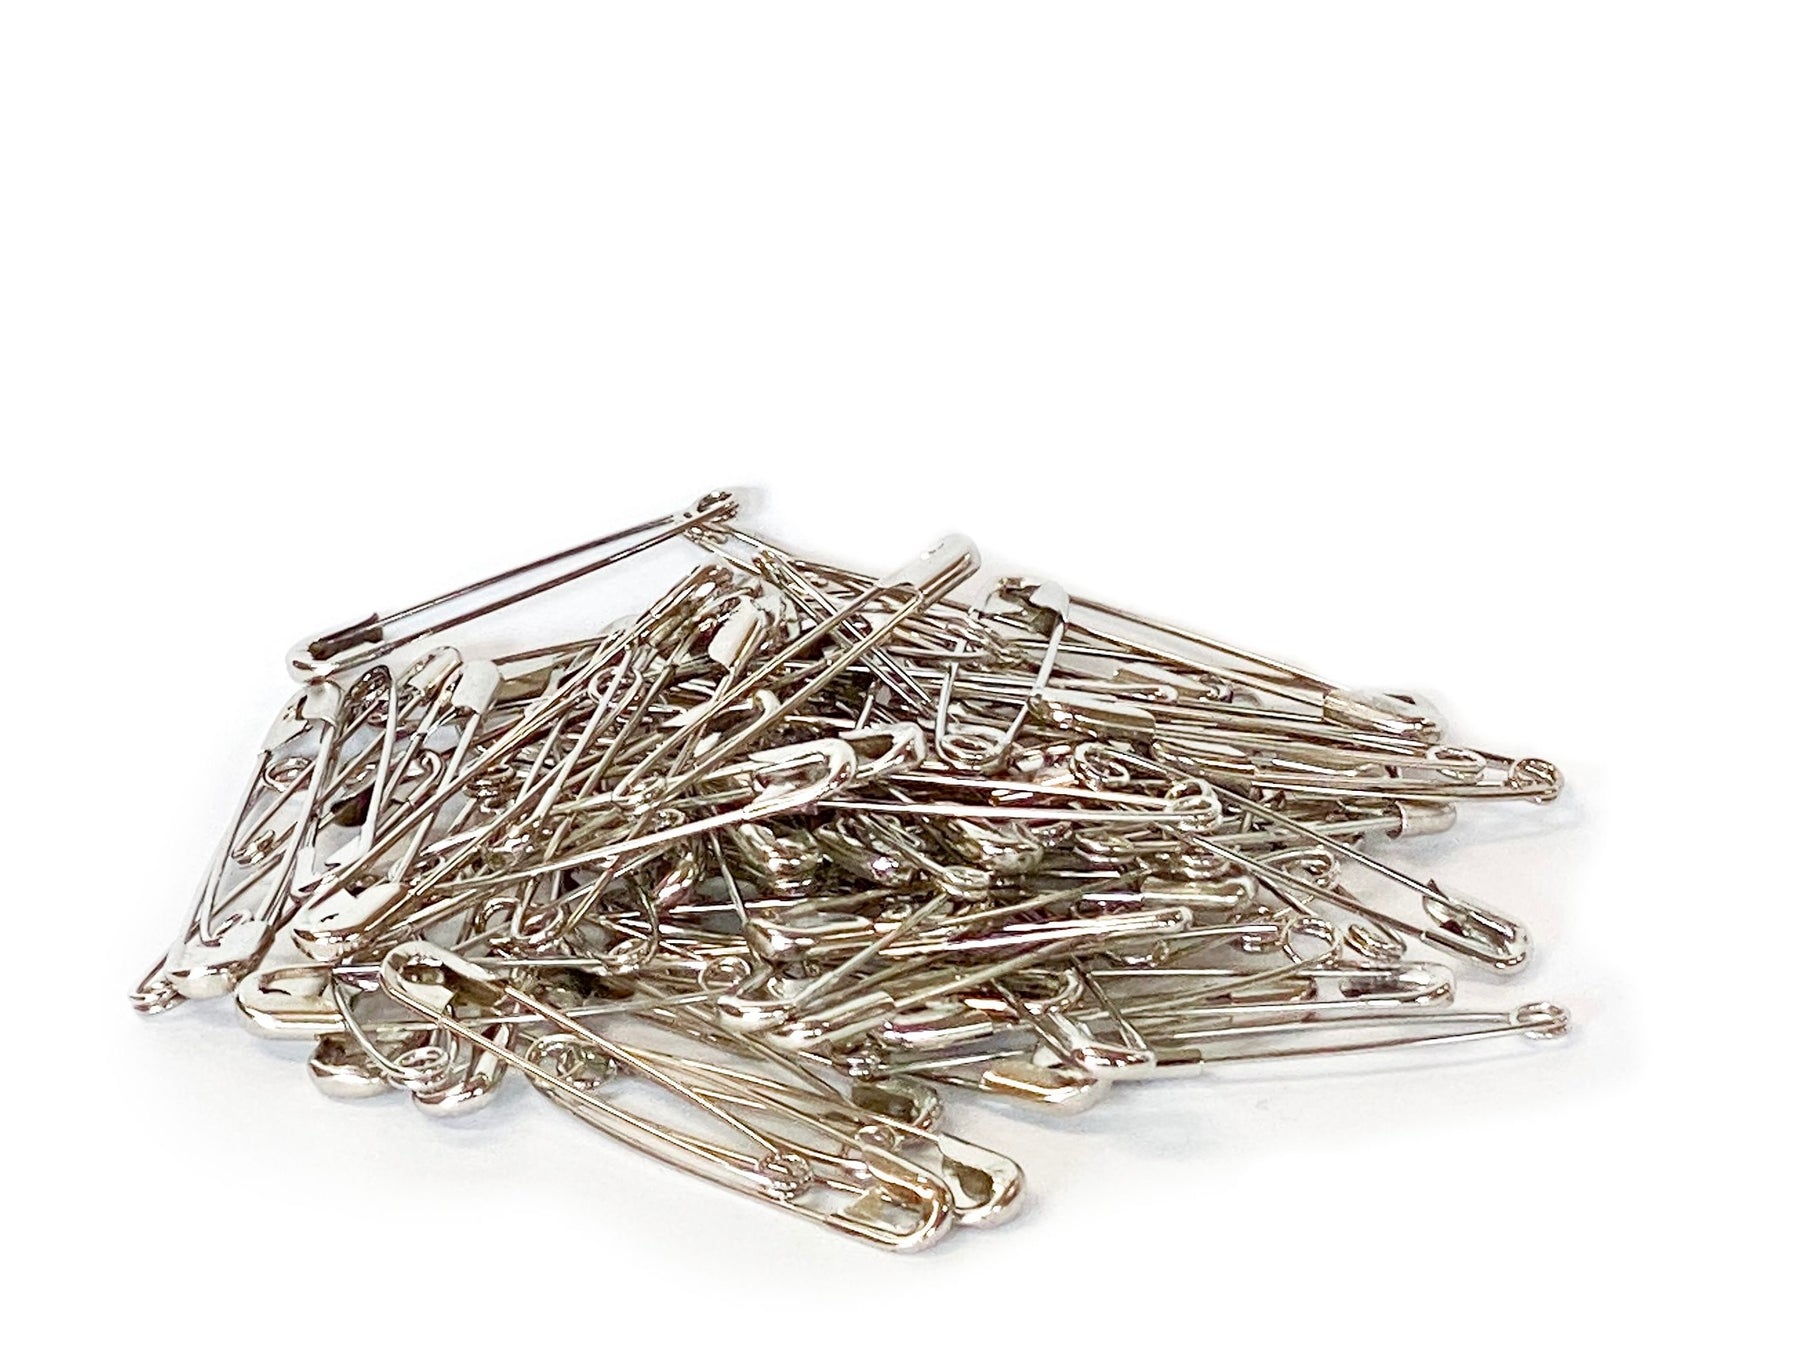 Upcycled Safety Pins